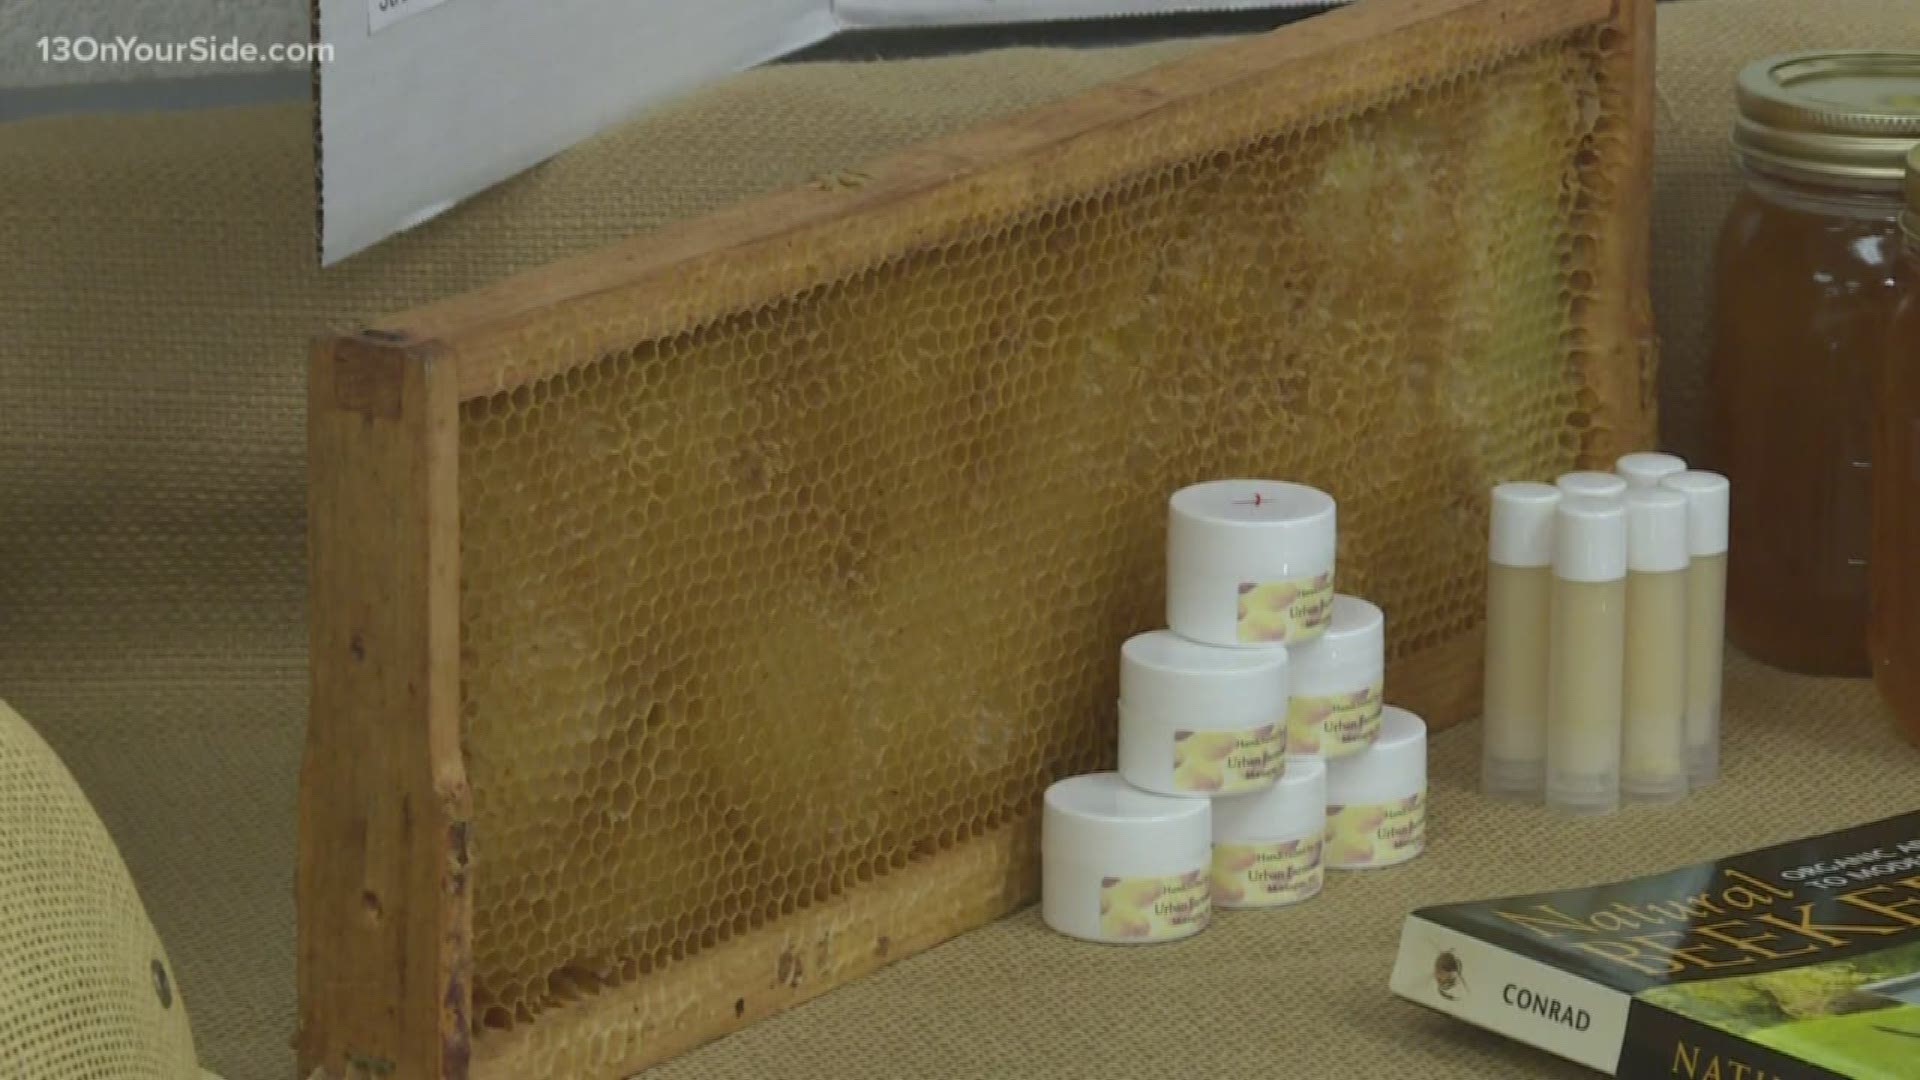 Two student members of Future Farmers of America have taken their beehive and made it a business by crafting bee wax cream and lip balm.